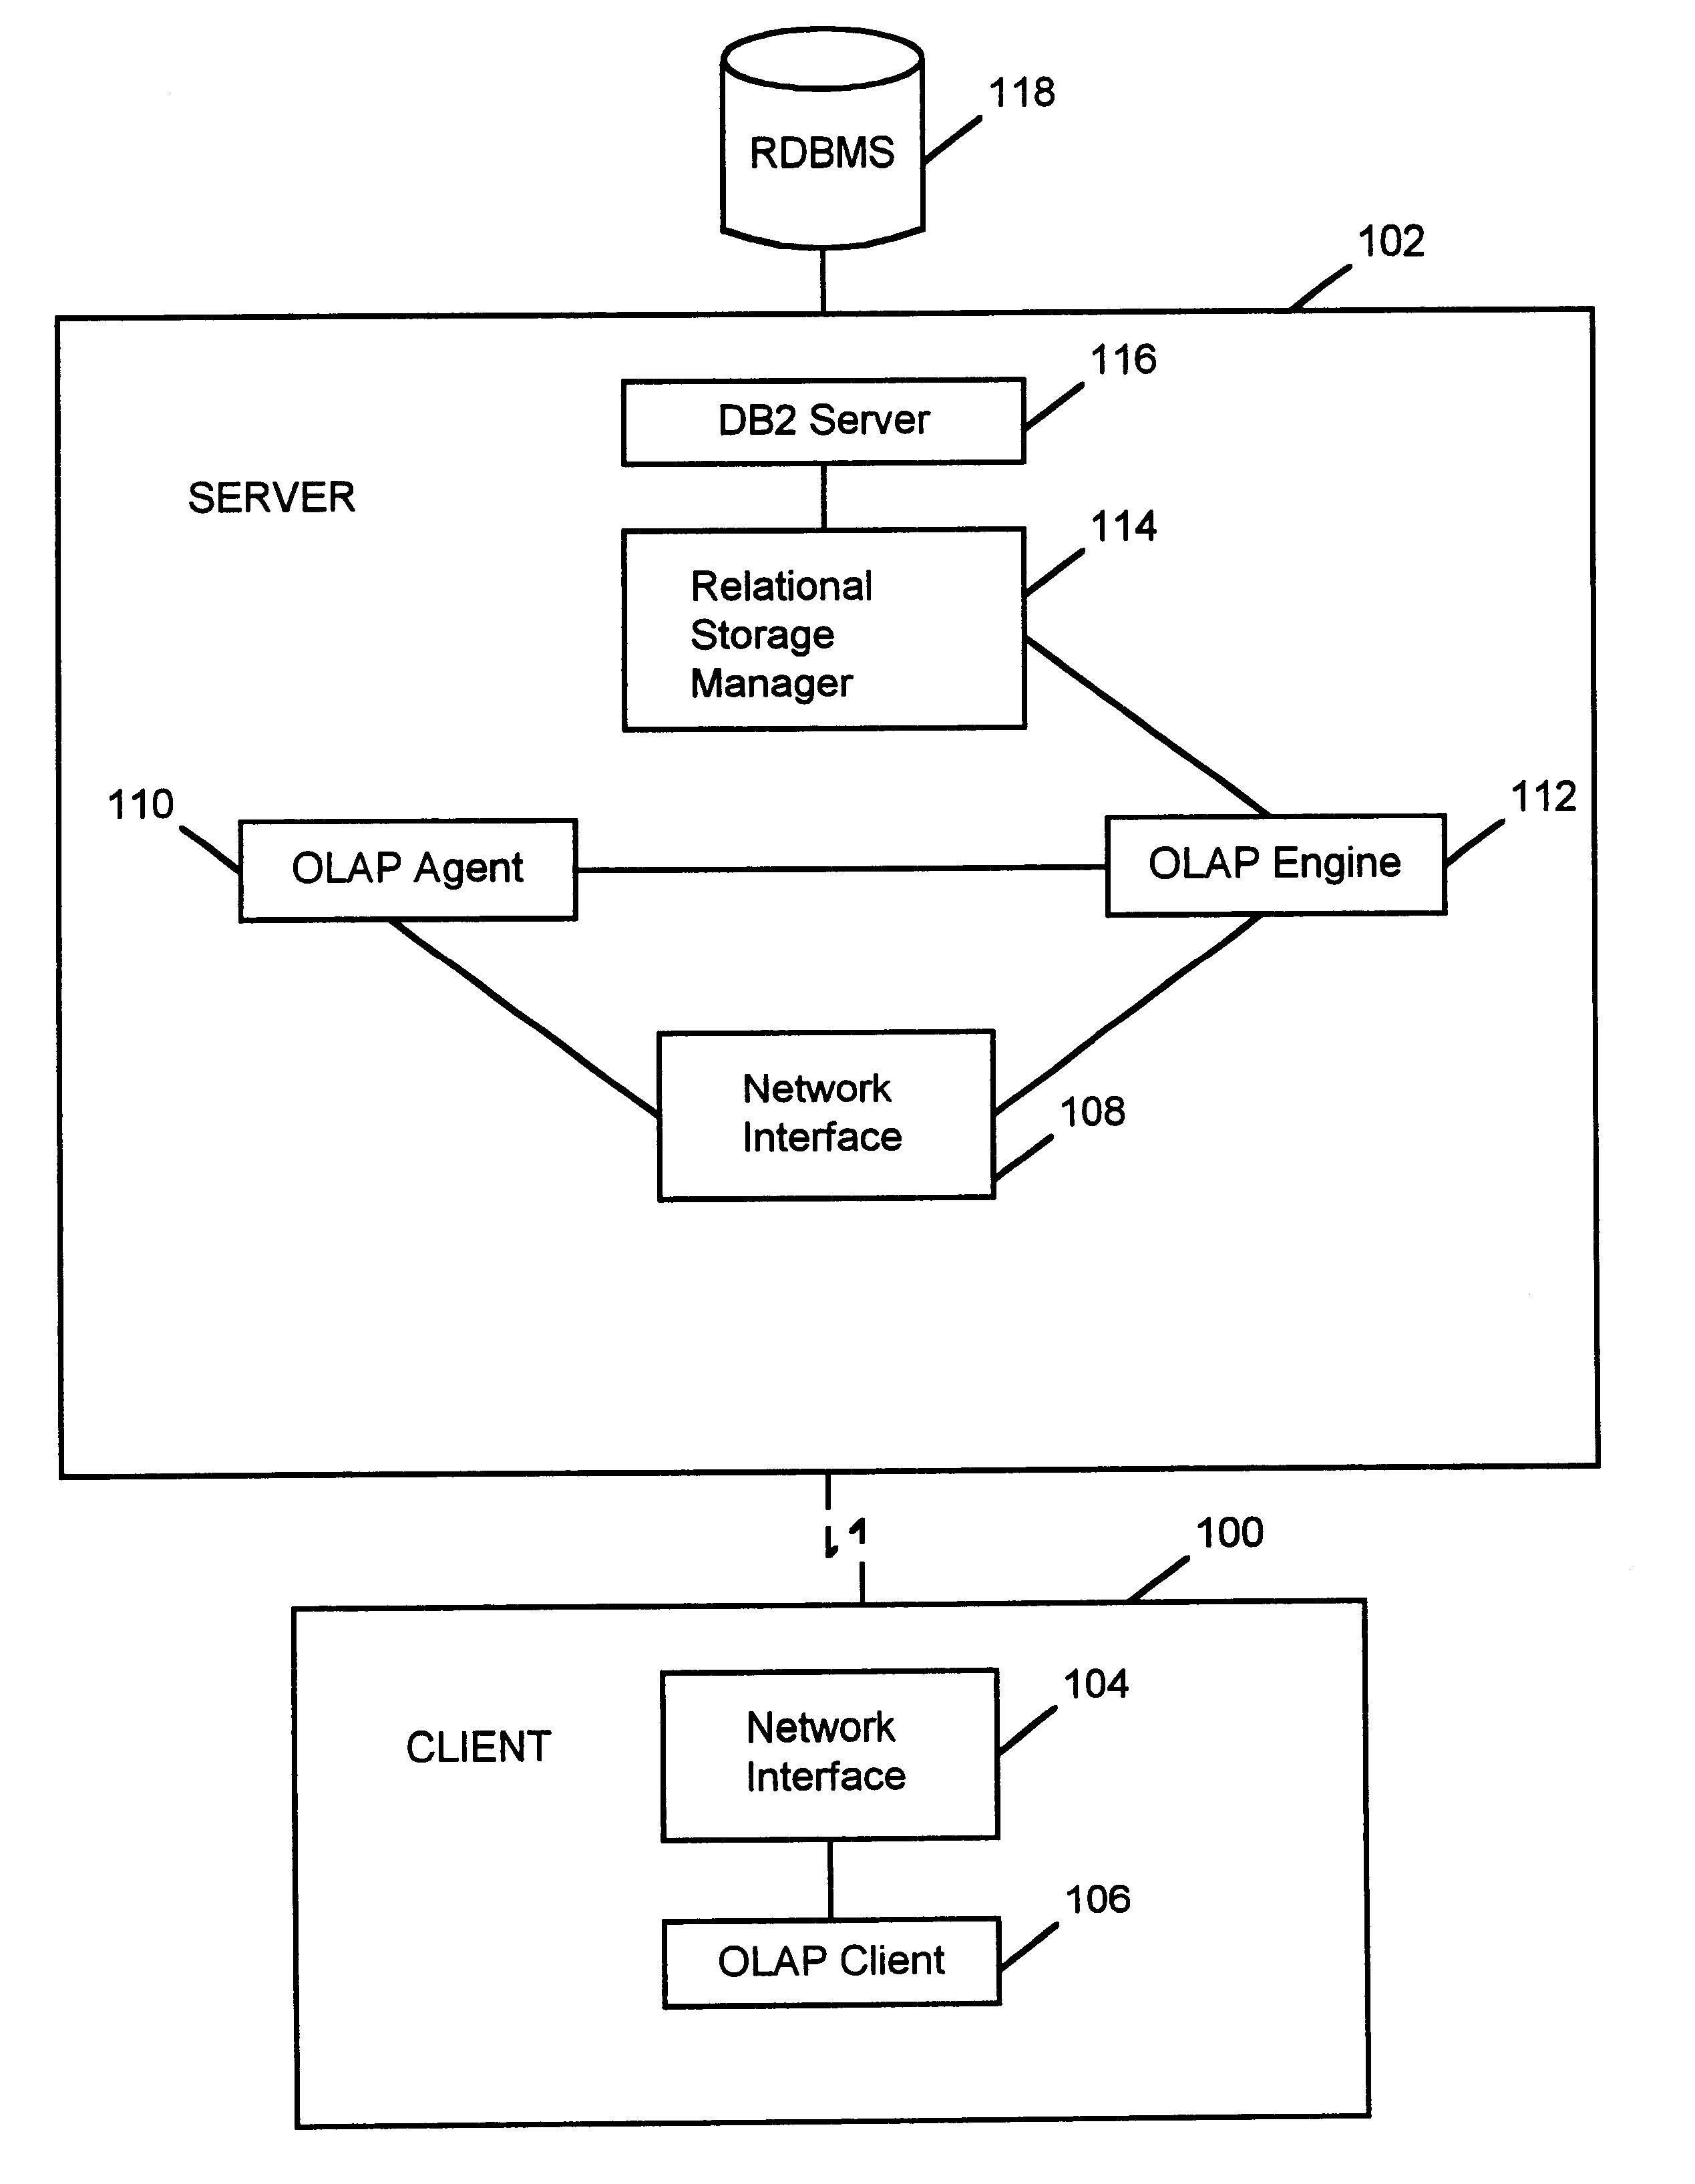 Multi-dimensional restructure performance by selecting a technique to modify a relational database based on a type of restructure